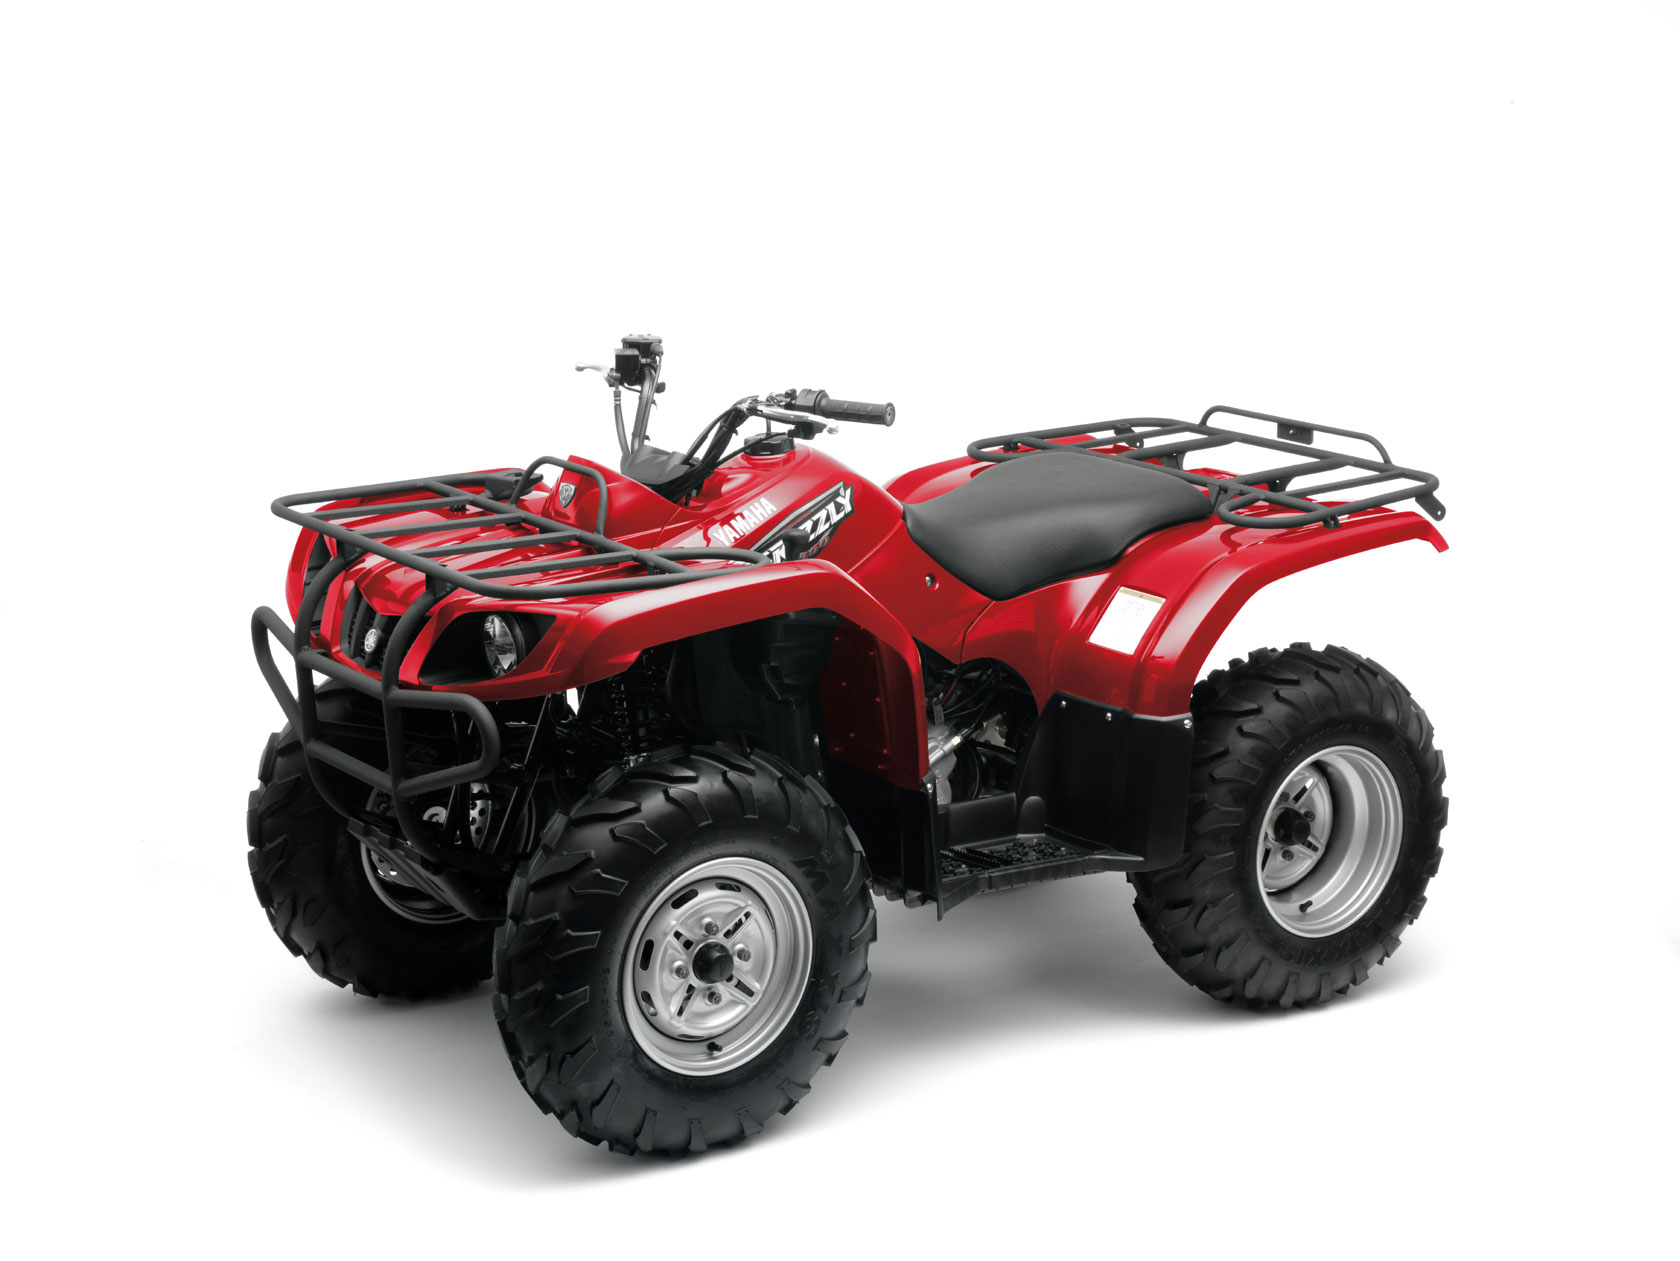 Yamaha Grizzly 350 2WD 2017 photo - 3